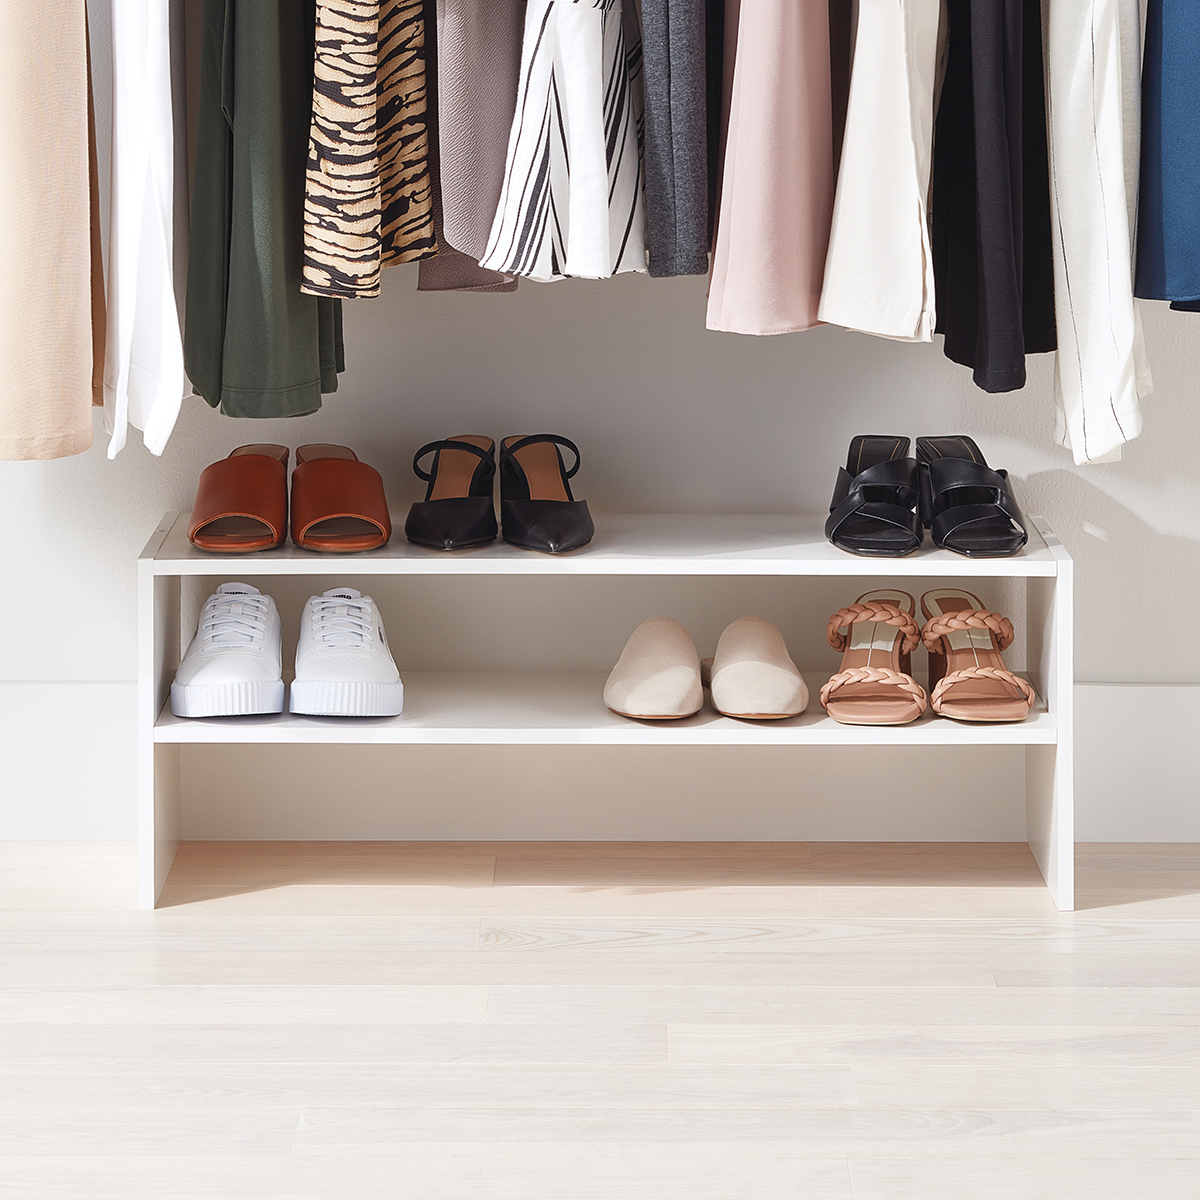 https://www.containerstore.com/catalogimages/480666/10091852-2-shelf-shoe-stacker-white-.jpg